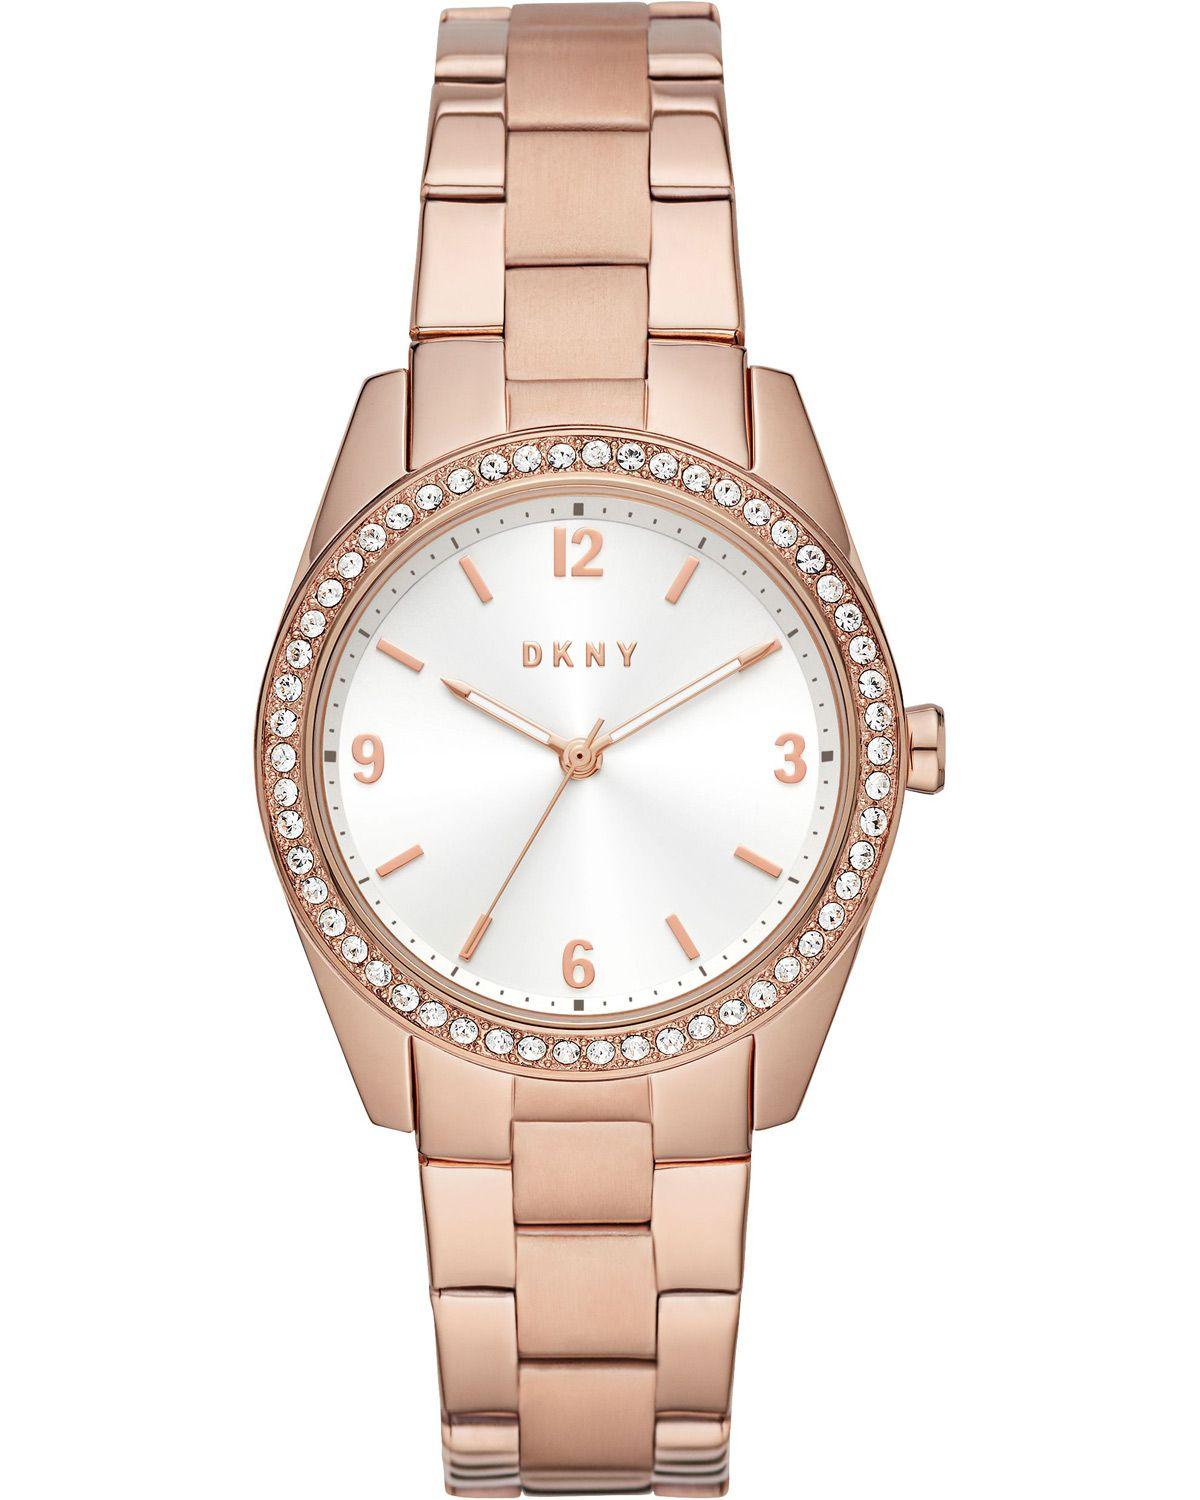 DKNY Nolita Crystals - NY2902, Rose Gold case with Stainless Steel Bracelet